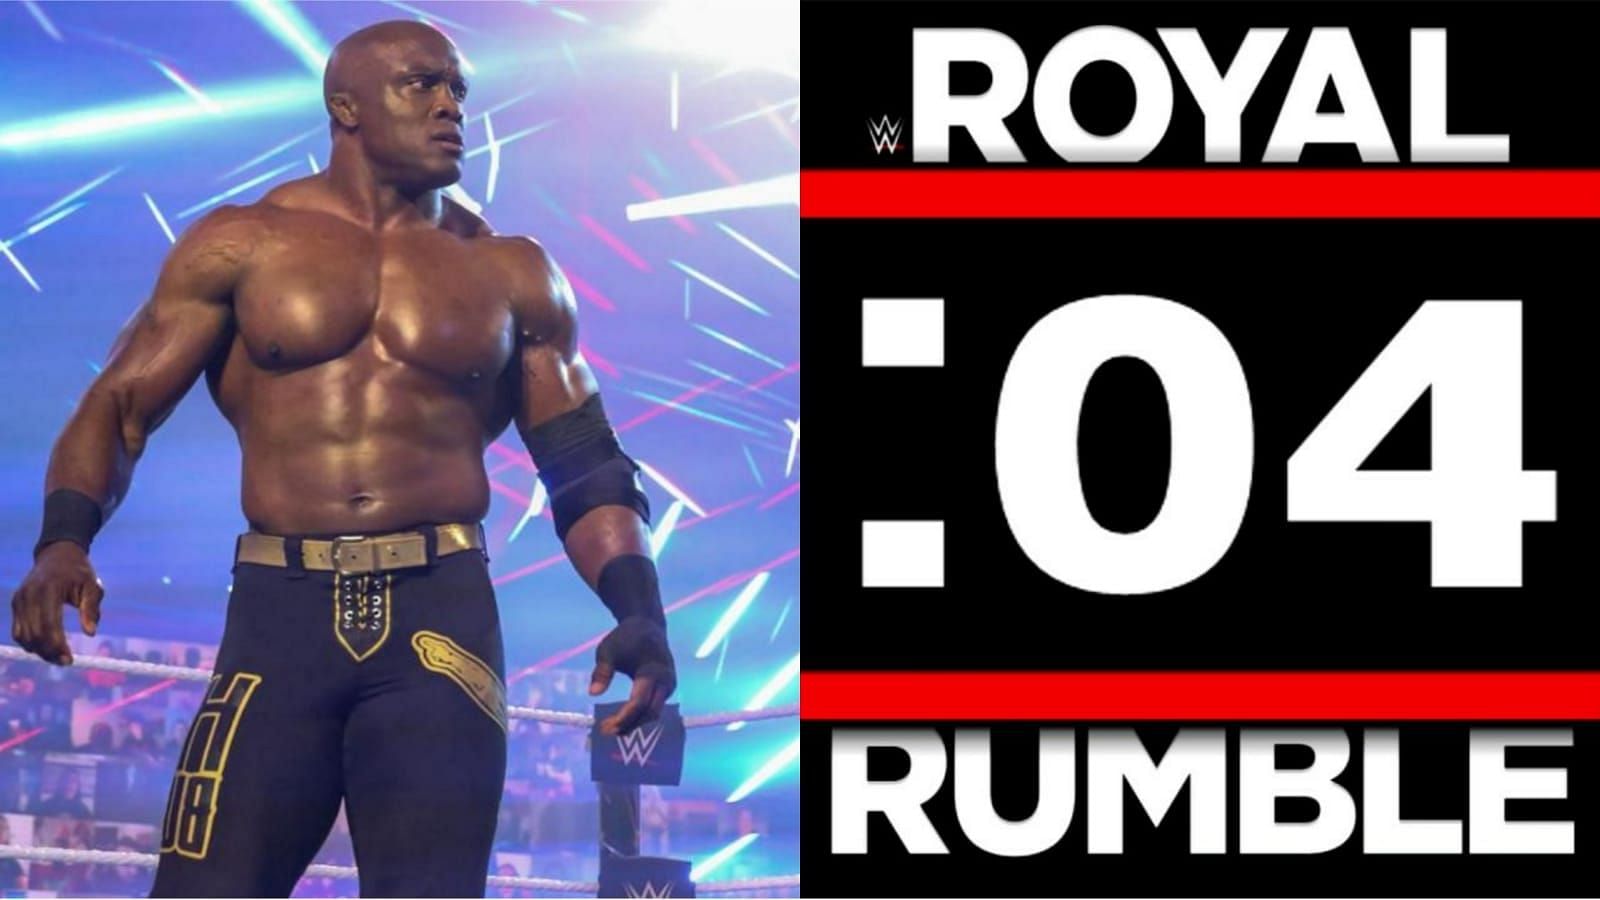 Bobby Lashley will be participating in the upcoming Royal Rumble match!